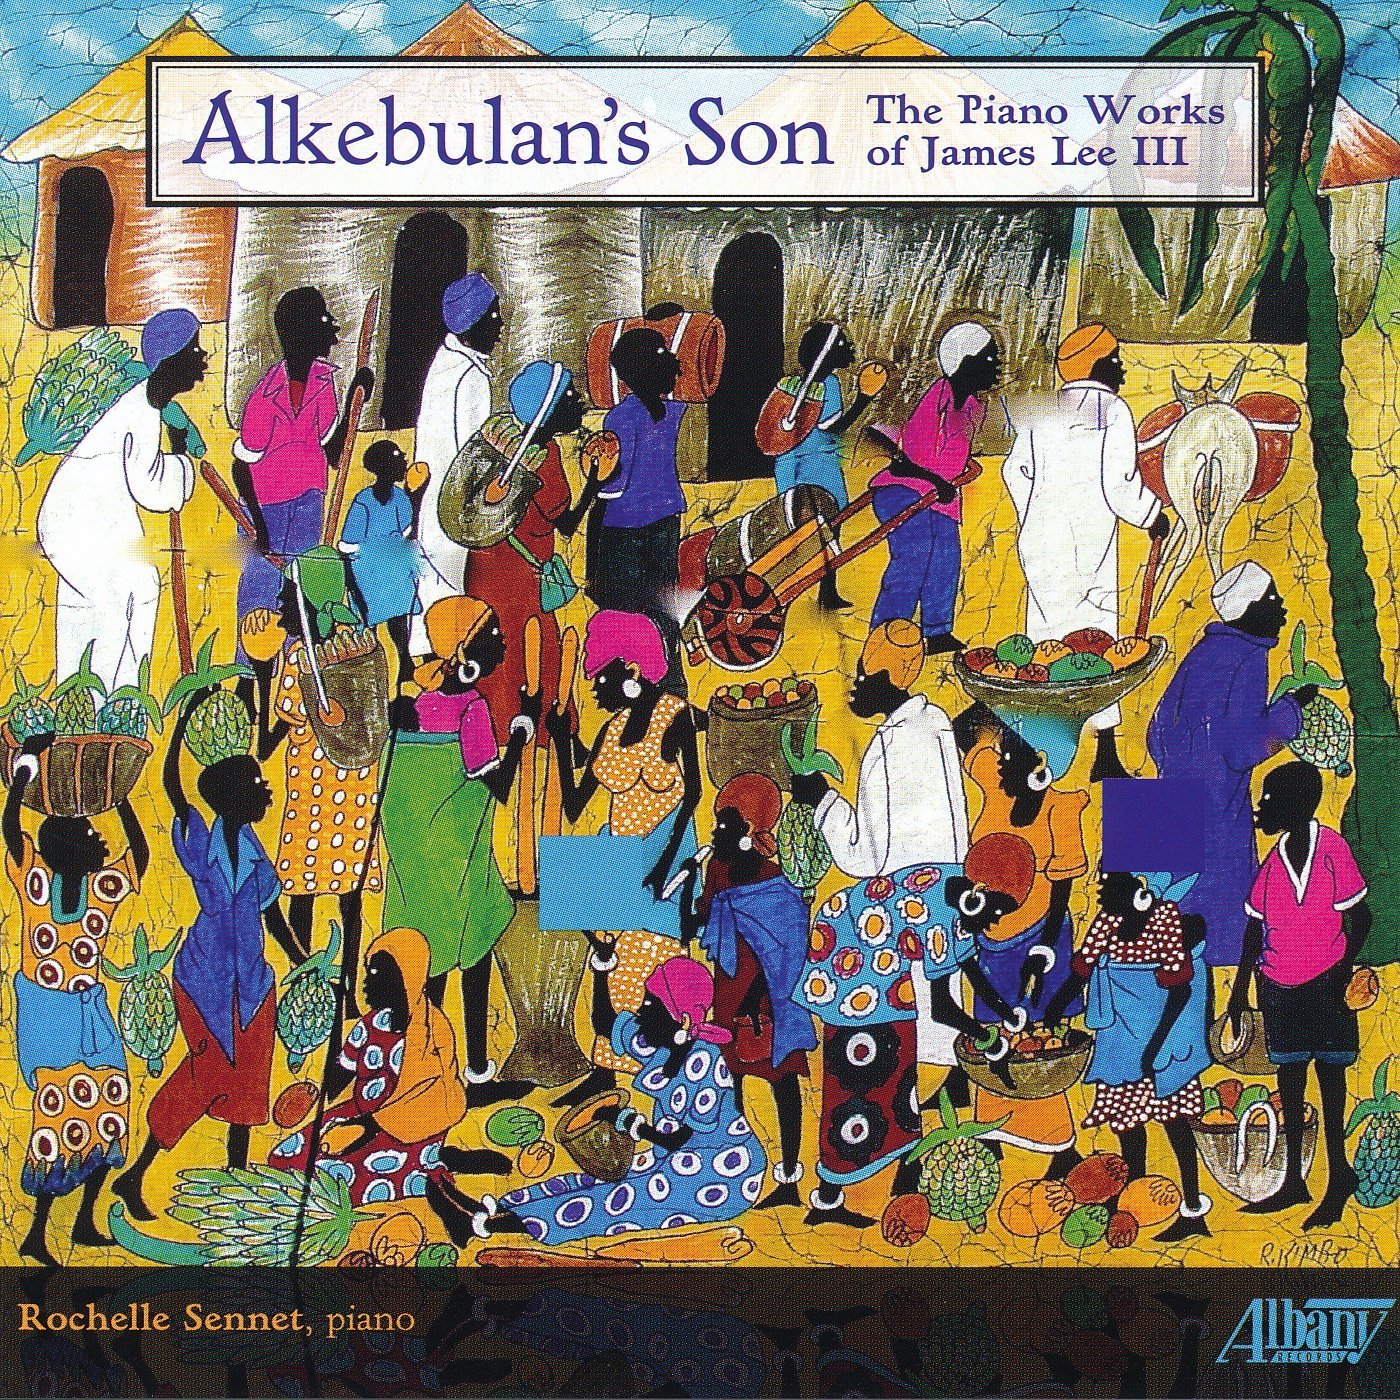 Alkebulan's Son: The Piano Works of James Lee III